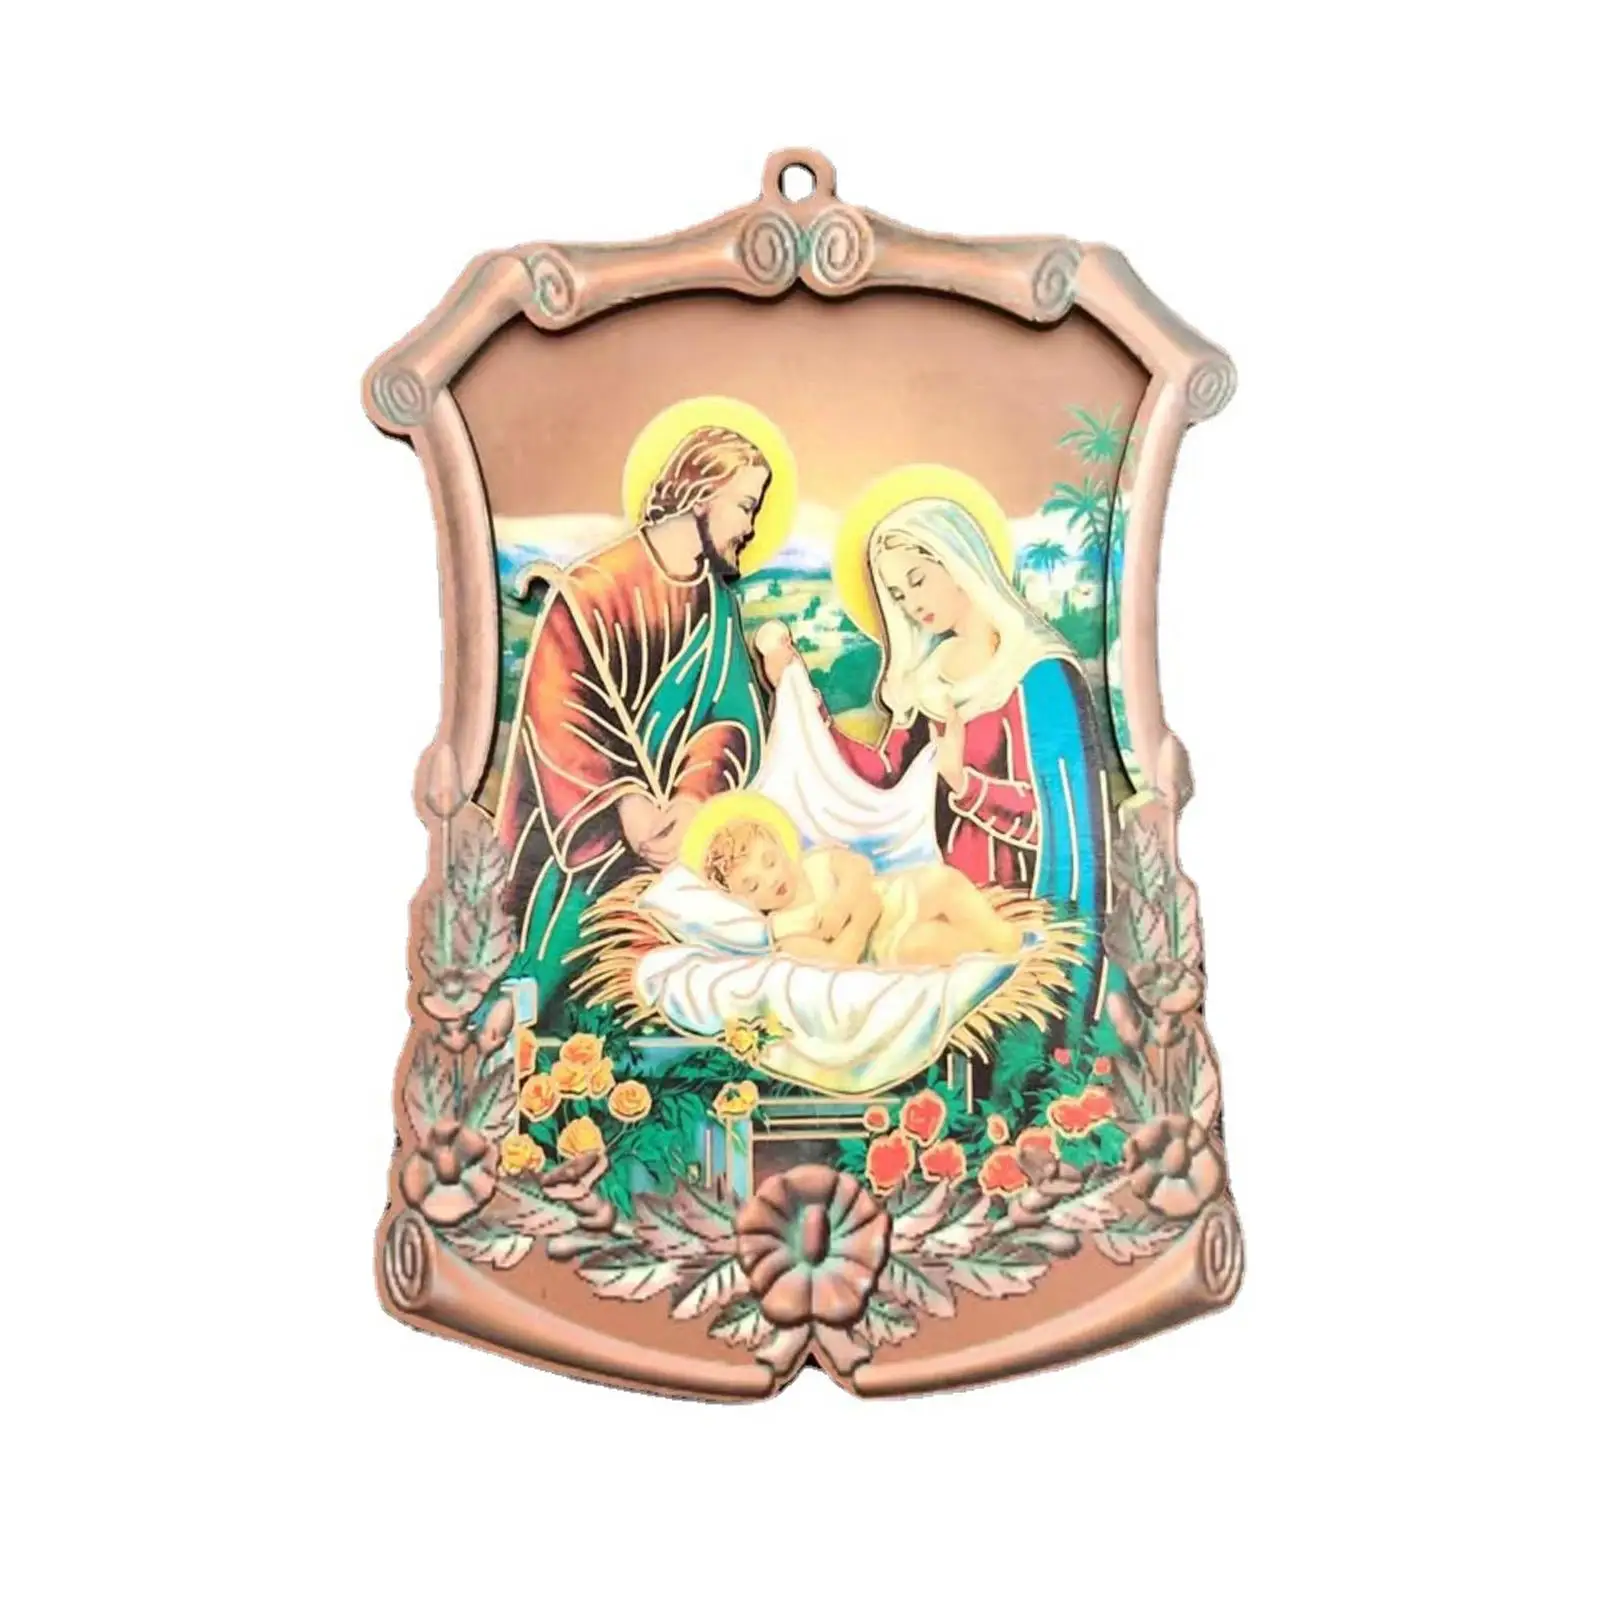 

Holy Family Wood Plaque Religious Figurine Classic Jesus Family Statue for Ornament Christian Collectibles Party Favors Holiday